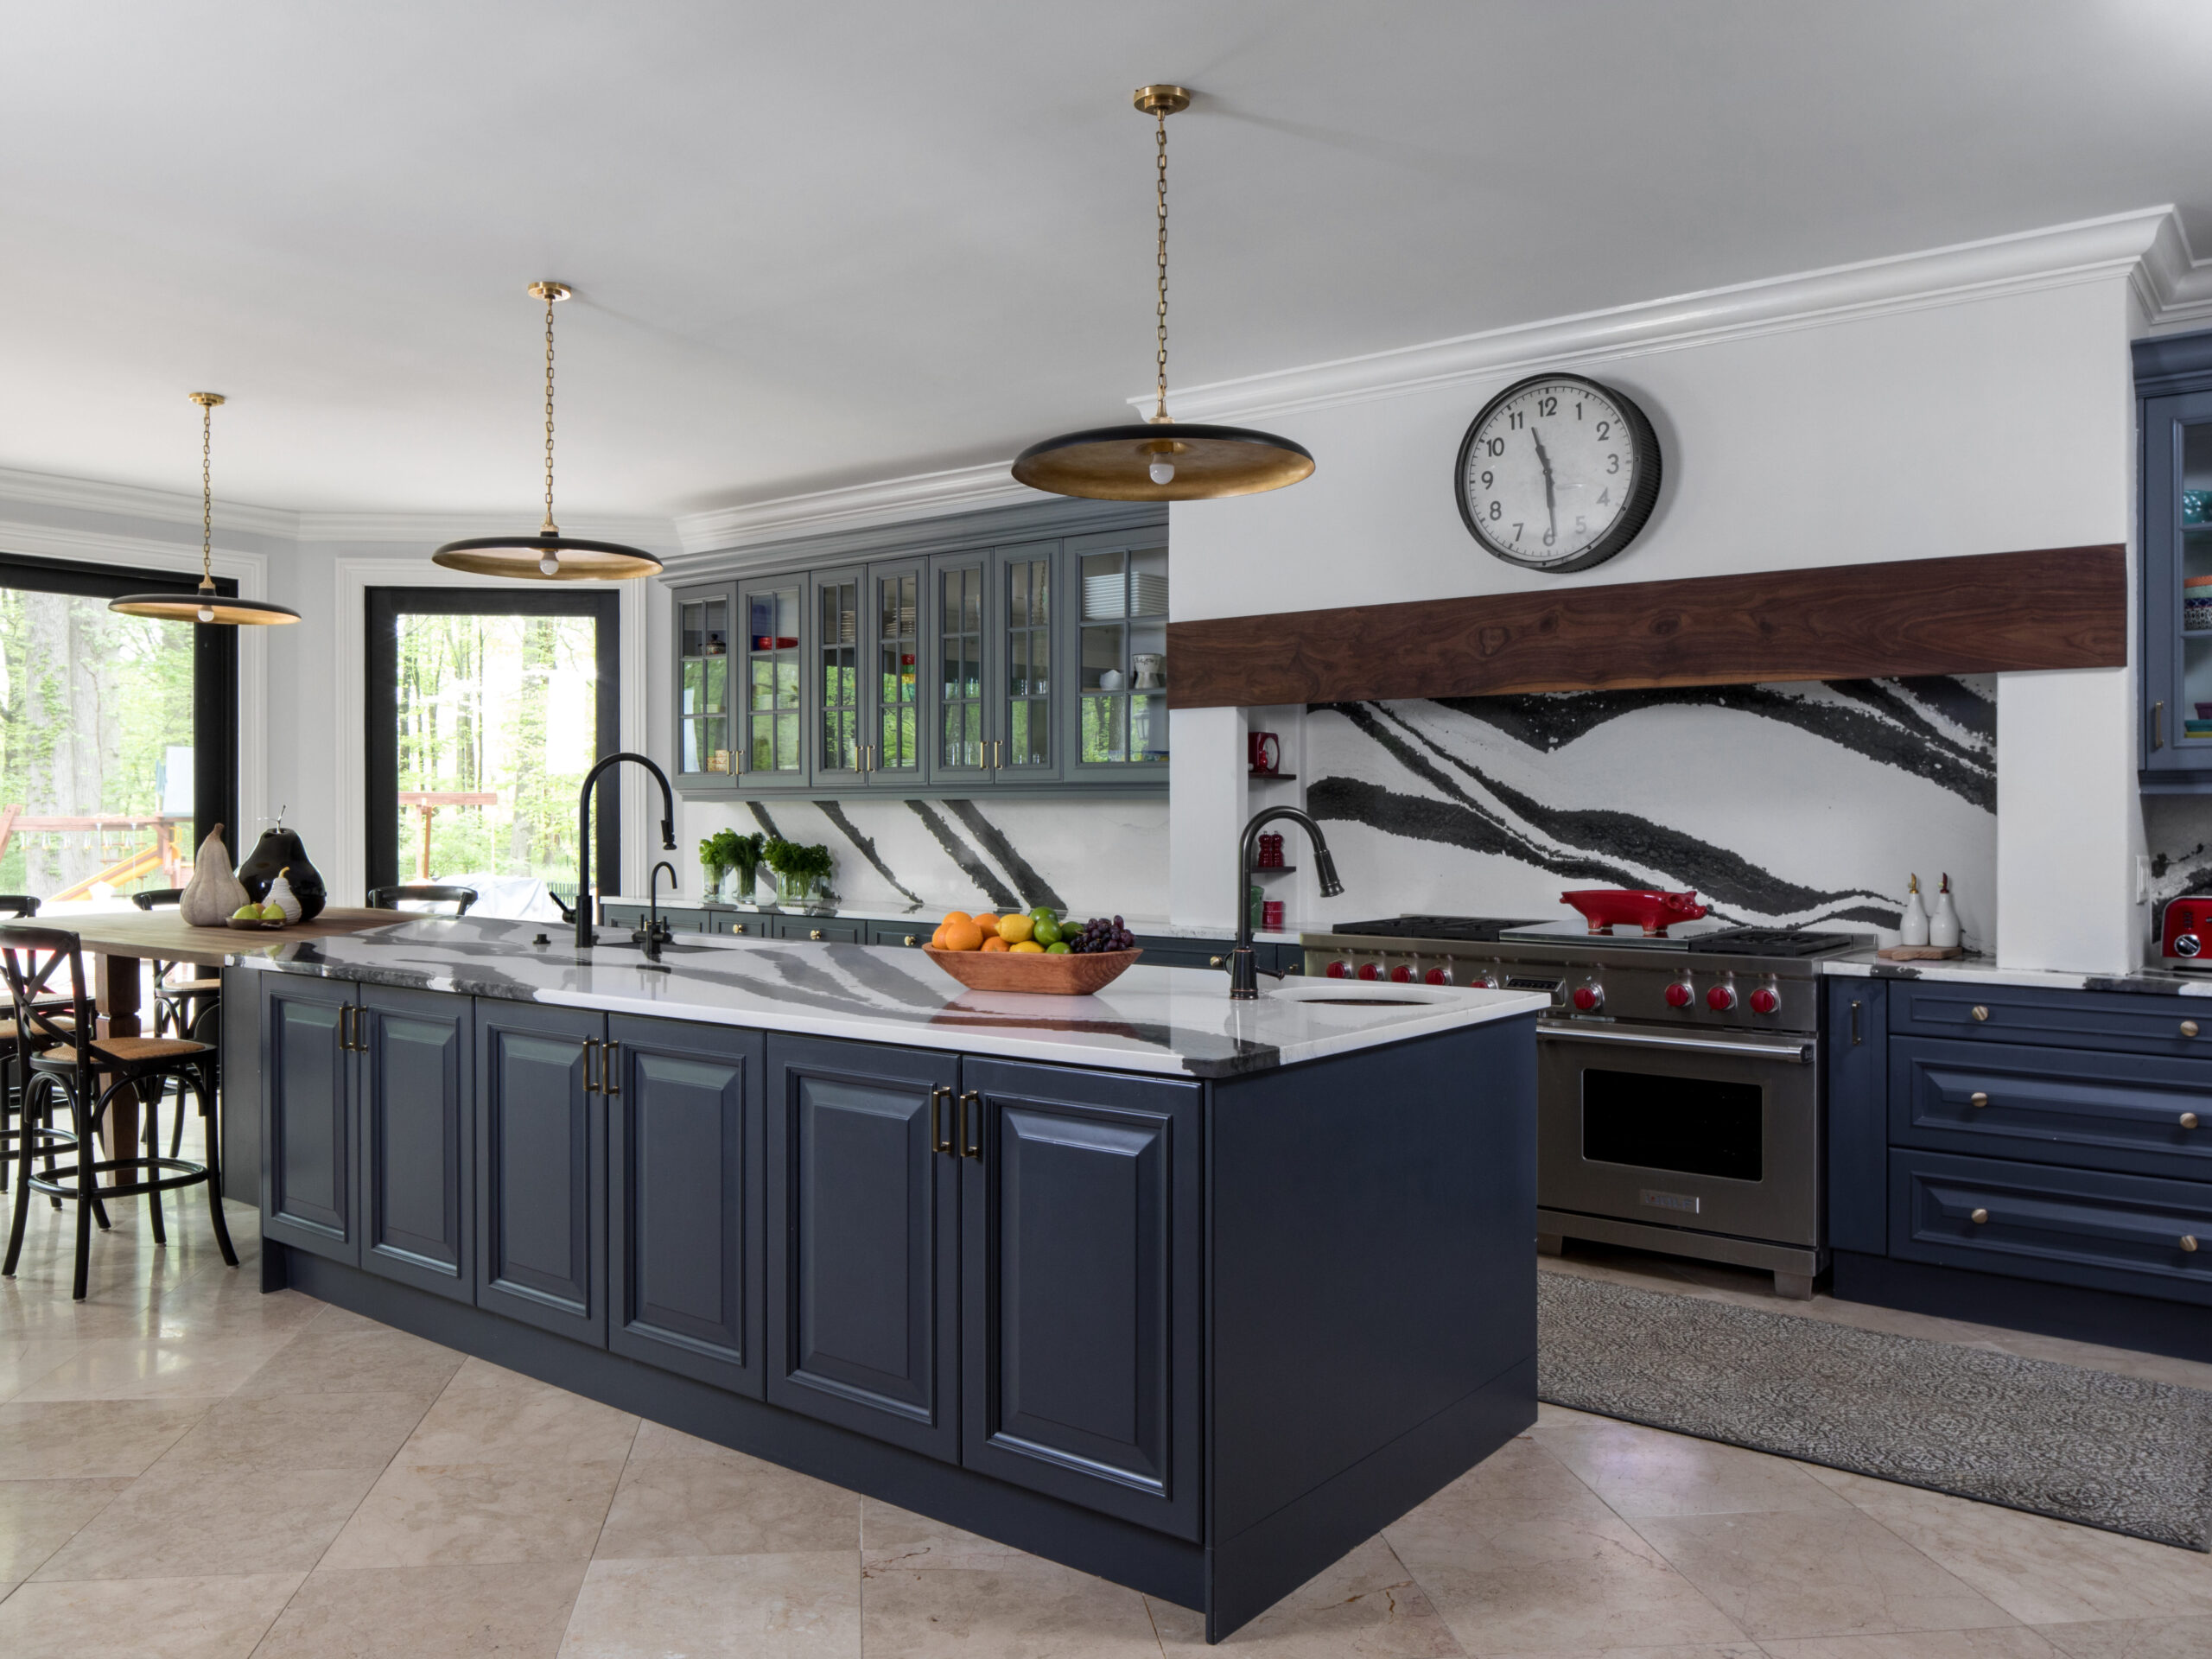 After image of a modern kitchen.